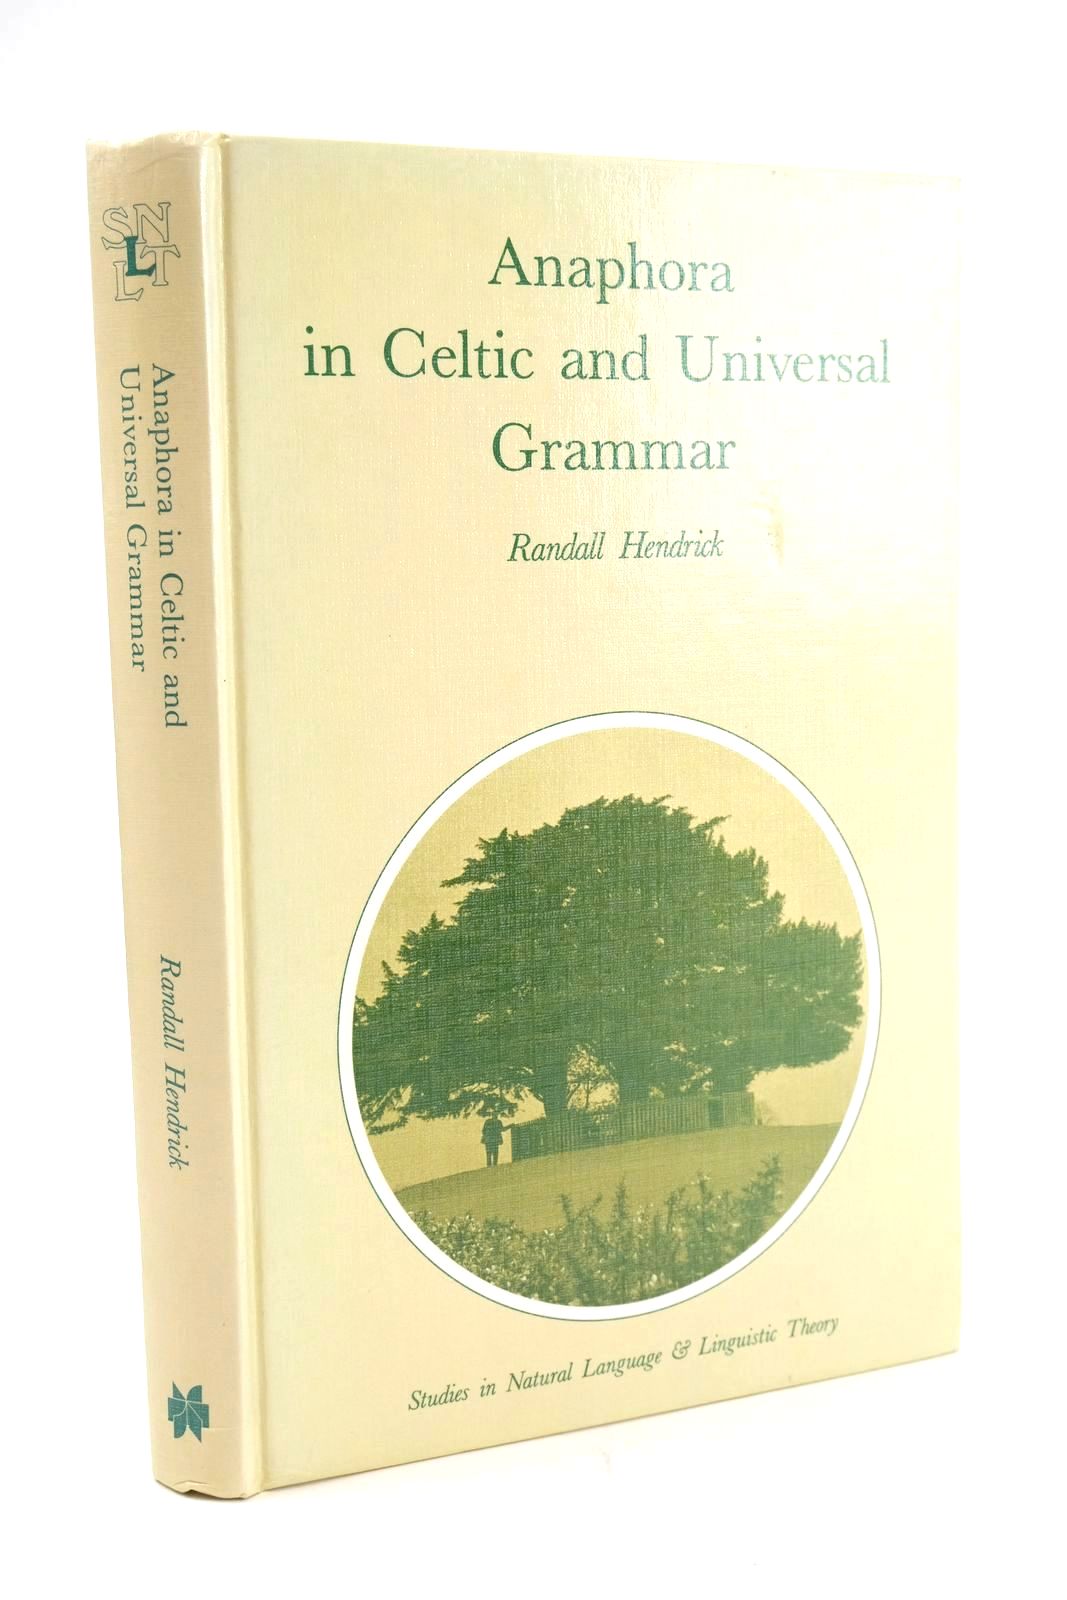 Photo of ANAPHORA IN CELTIC AND UNIVERSAL GRAMMAR written by Hendrick, Randall published by Kluwer Academic Publishers (STOCK CODE: 1324956)  for sale by Stella & Rose's Books